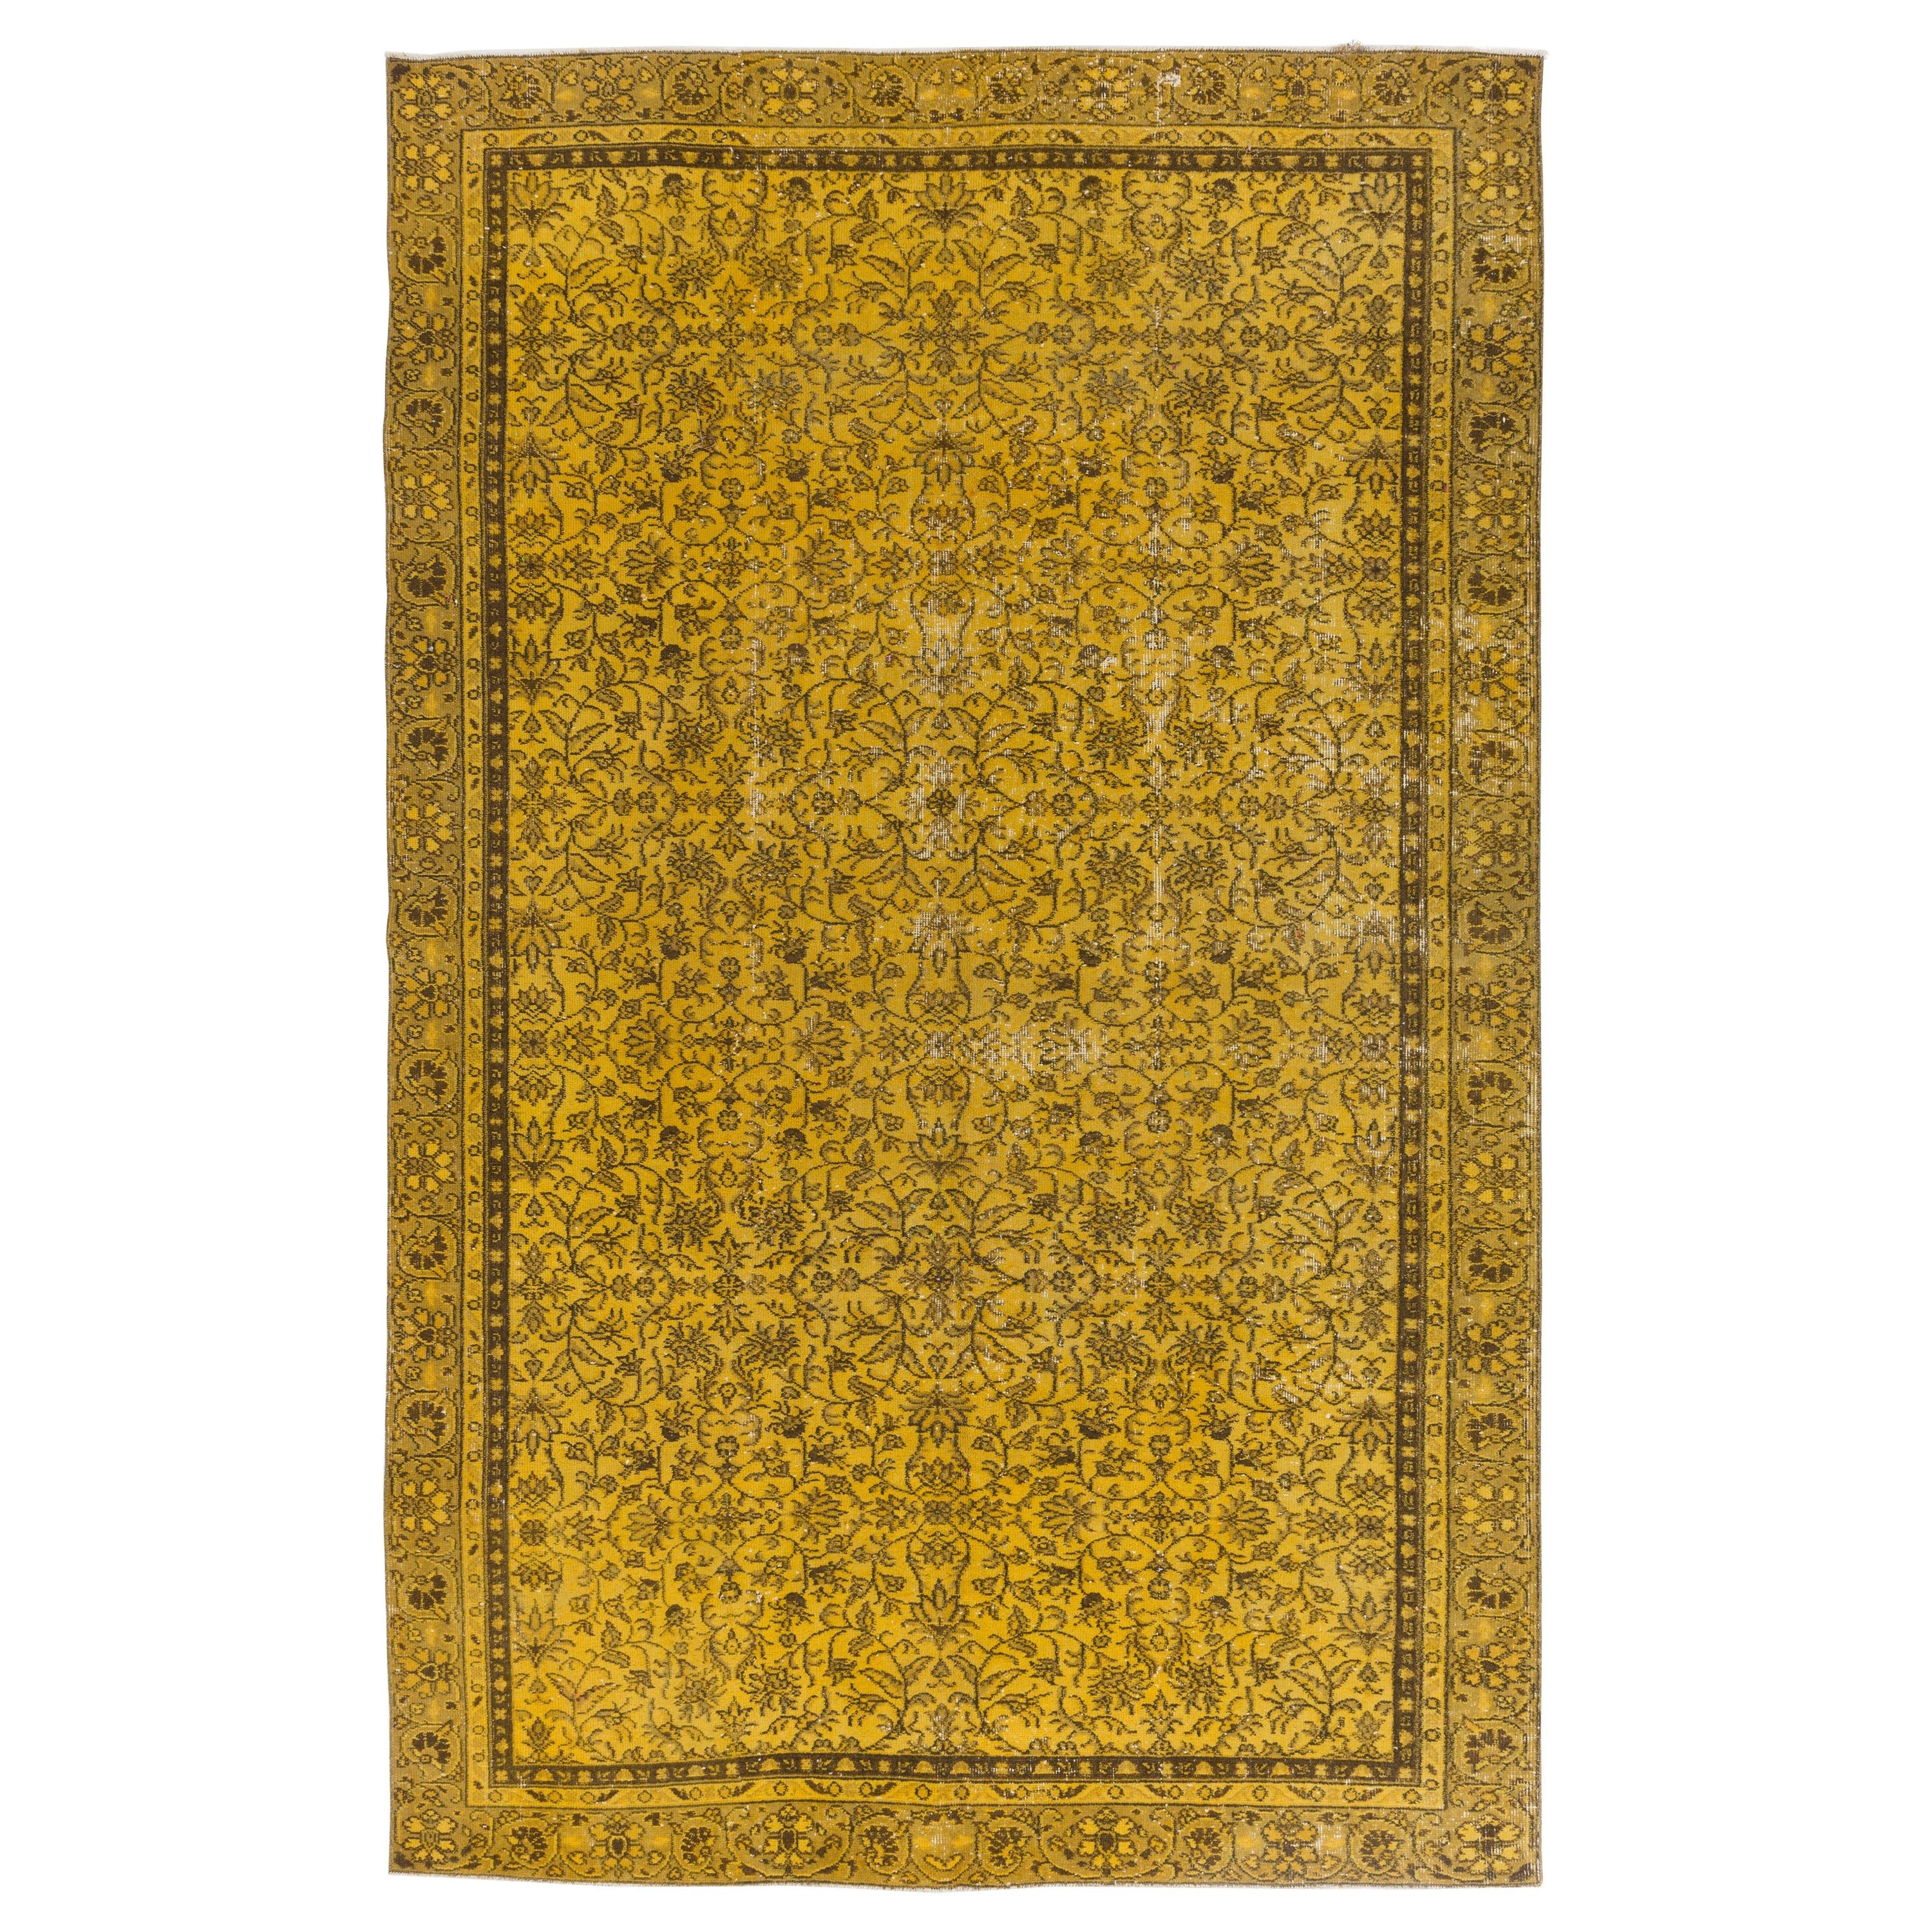 Modern Handmade Area Rug in Yellow, Floral Patterned Turkish Carpet For Sale